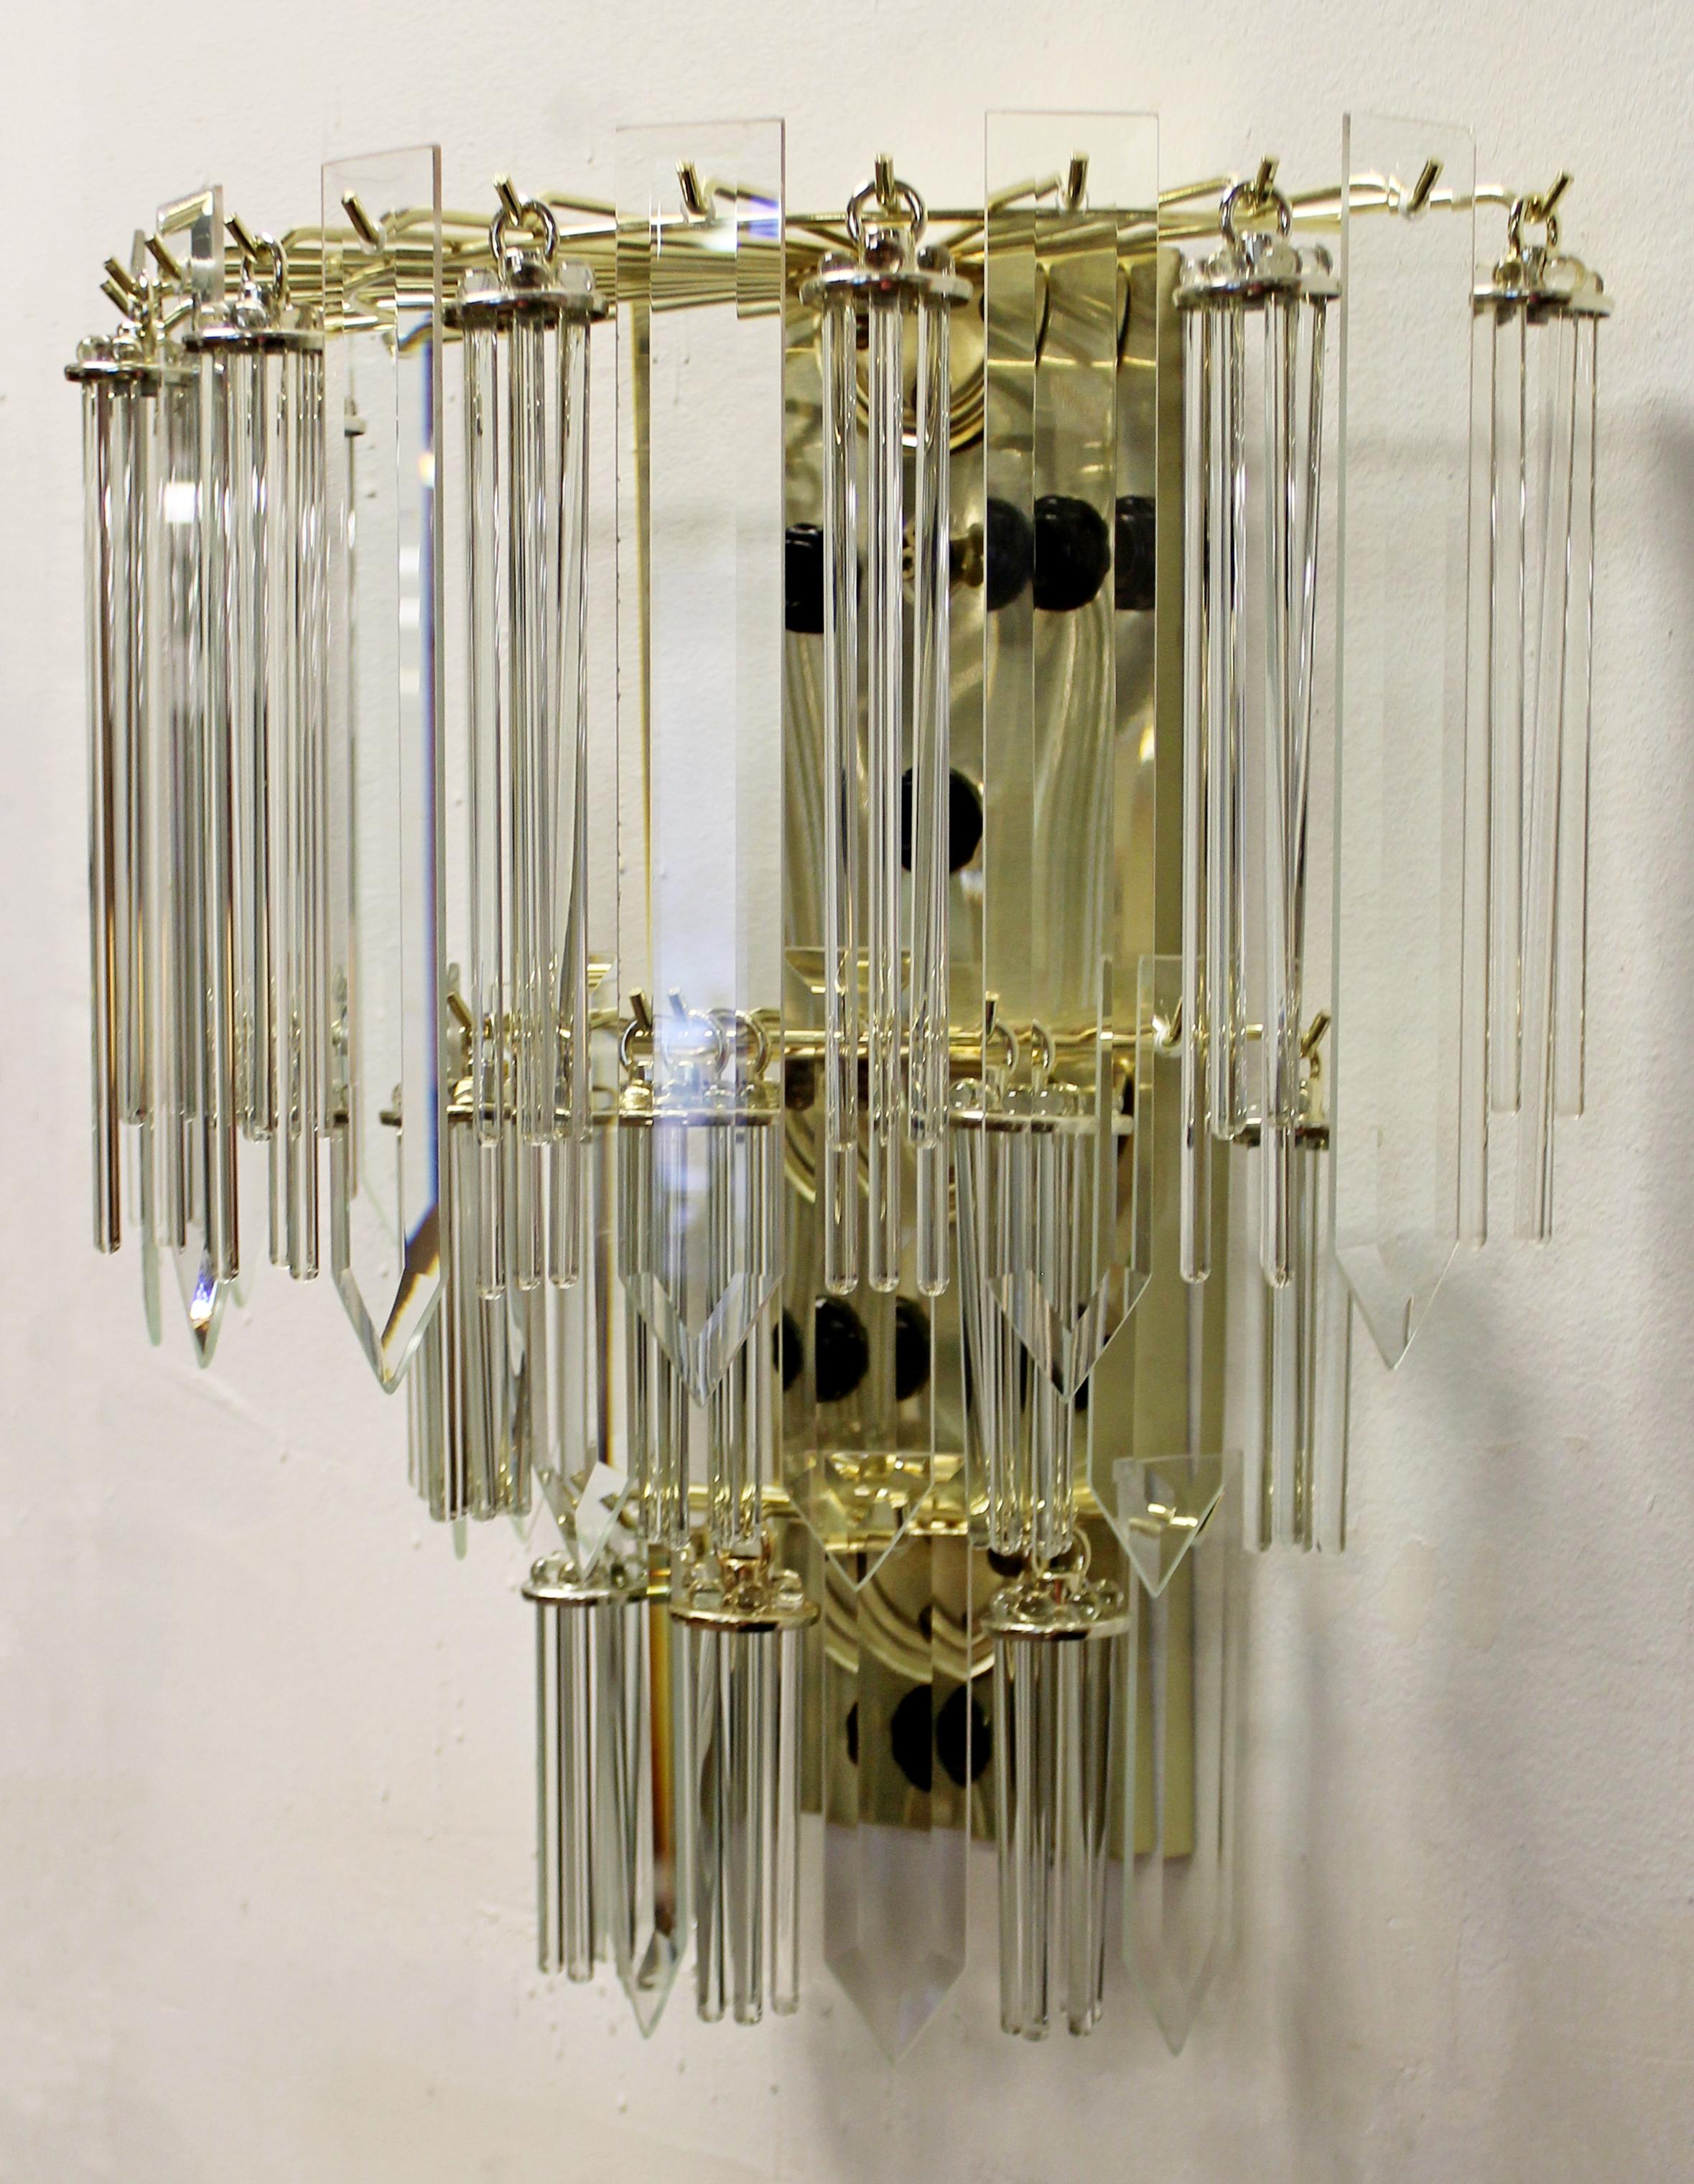 For your consideration is a Murano wall sconce, made of brass and glass, circa 1960s. In excellent vintage condition. The dimensions are 16.5